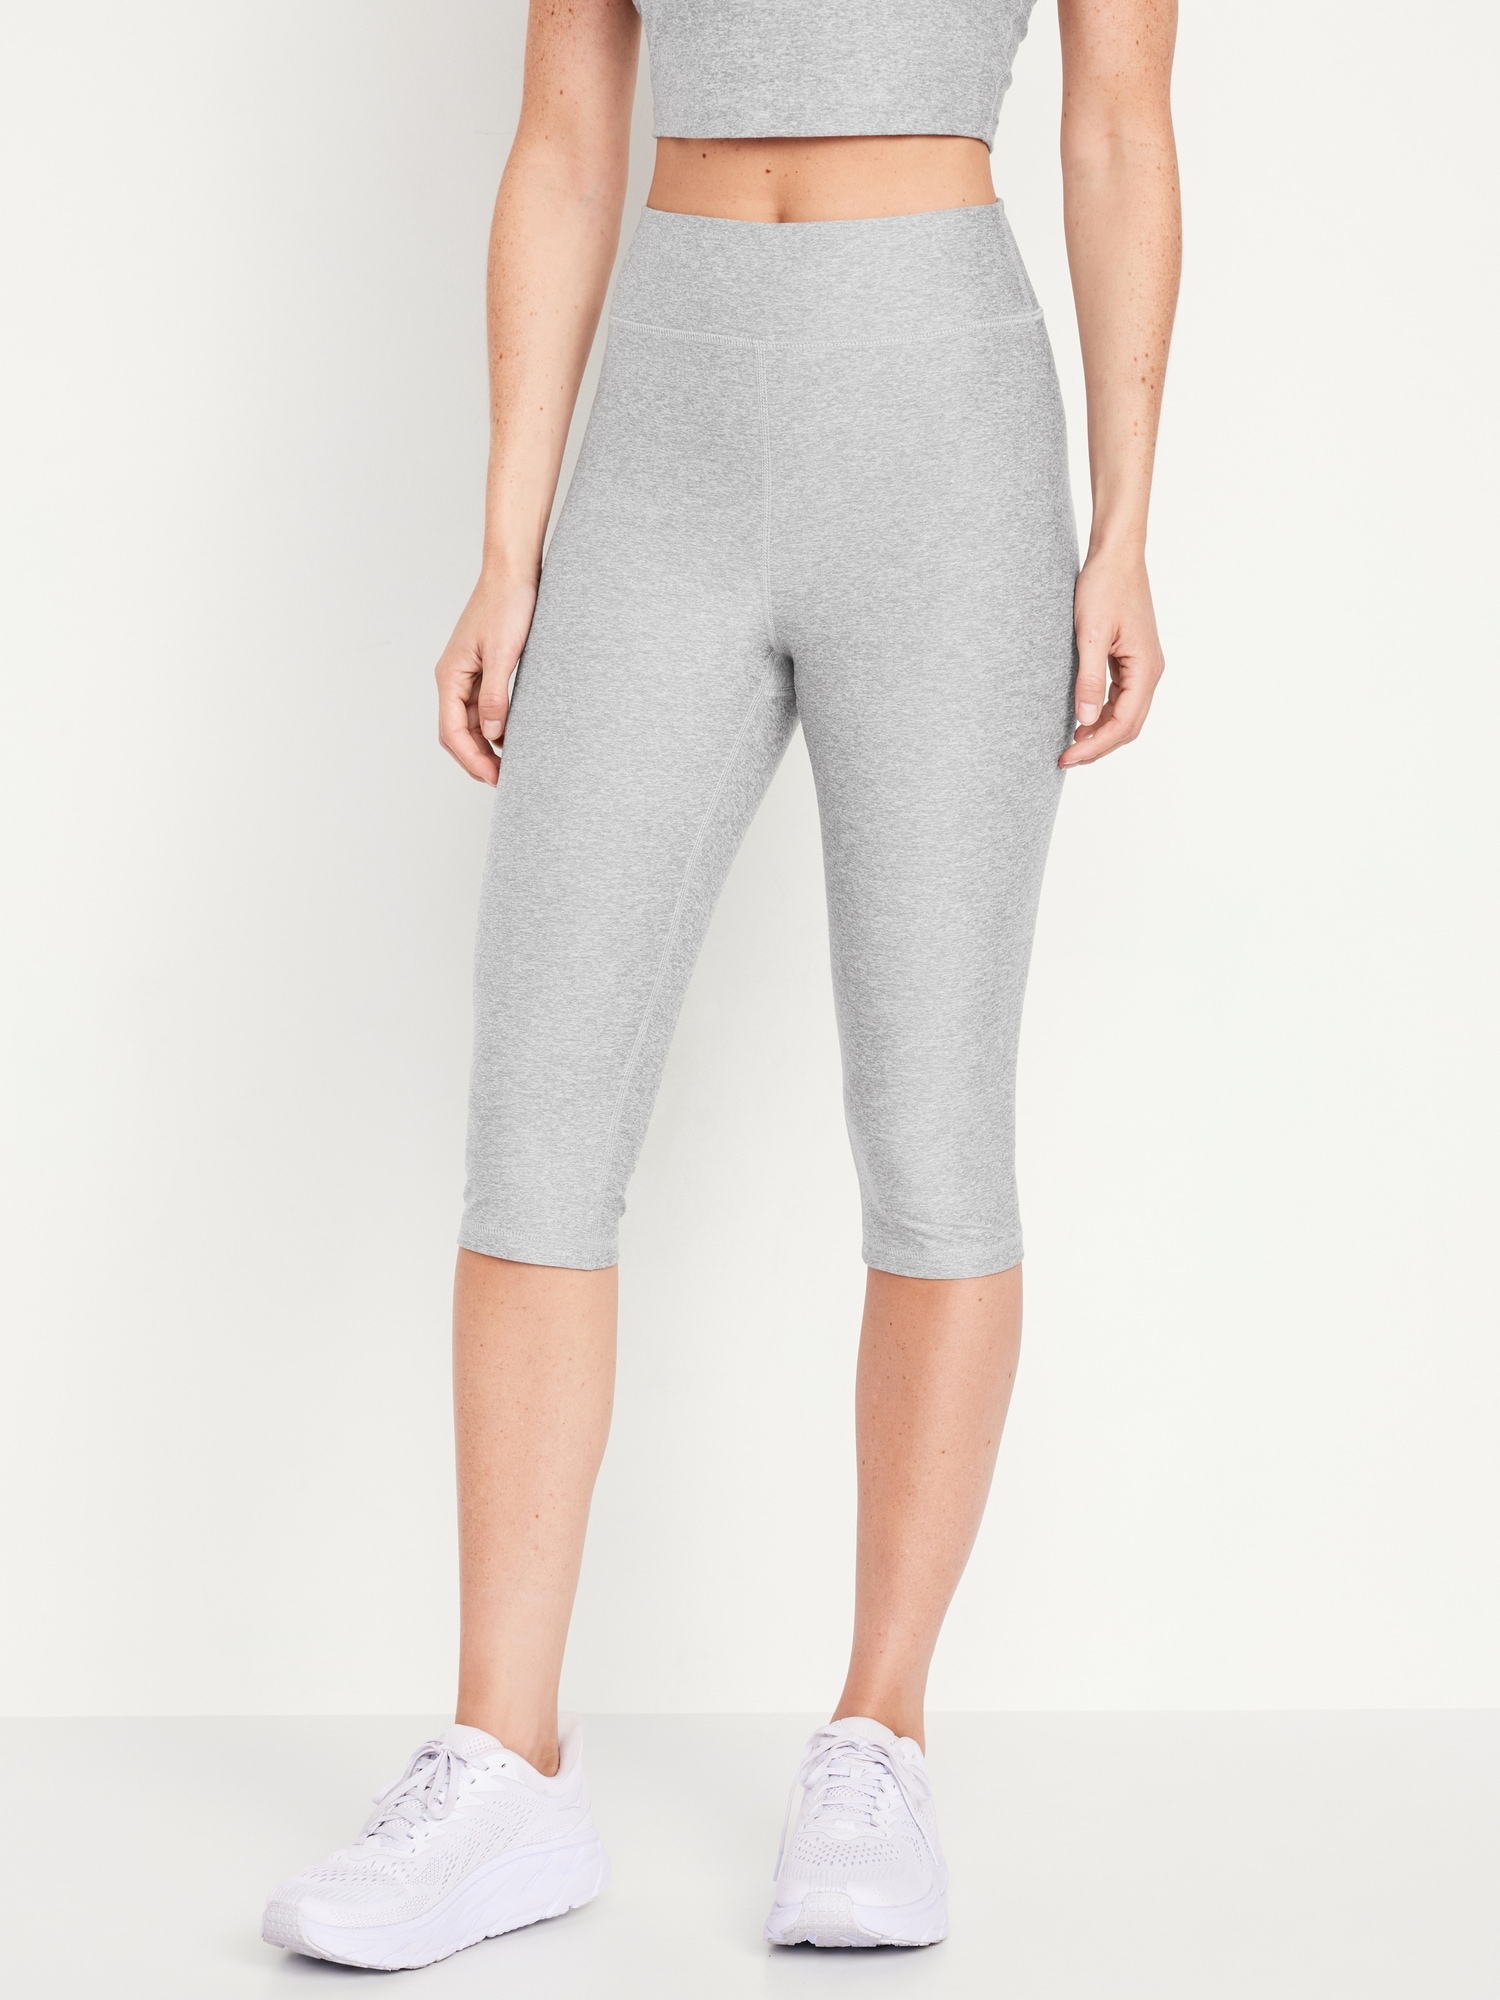 Extra High-Waisted Cloud+ Crop Leggings - 16-inch inseam